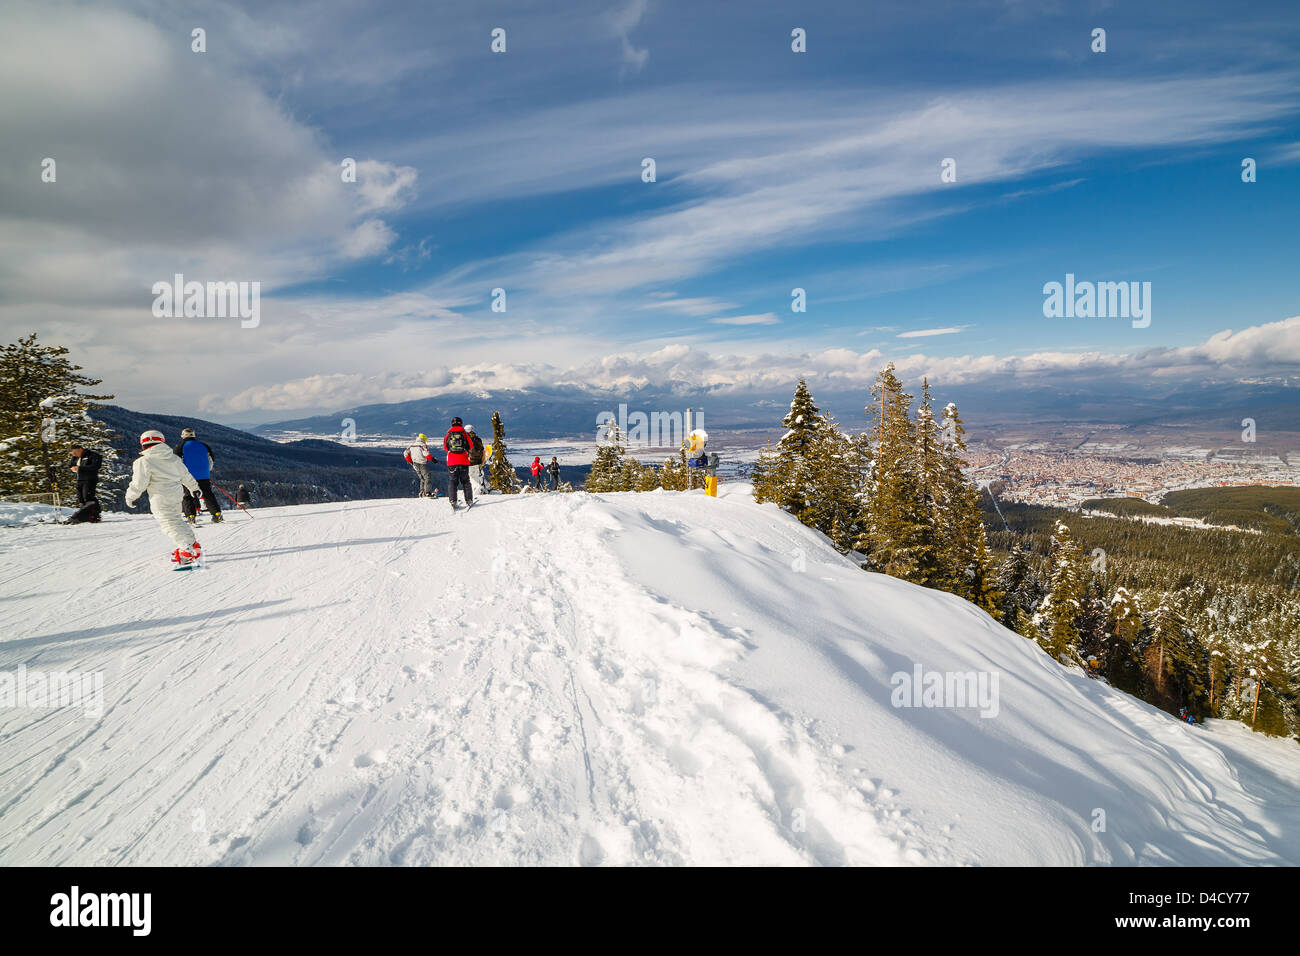 Mountain skiers and snowboarders at top of a slope of the mountain before skiing Stock Photo